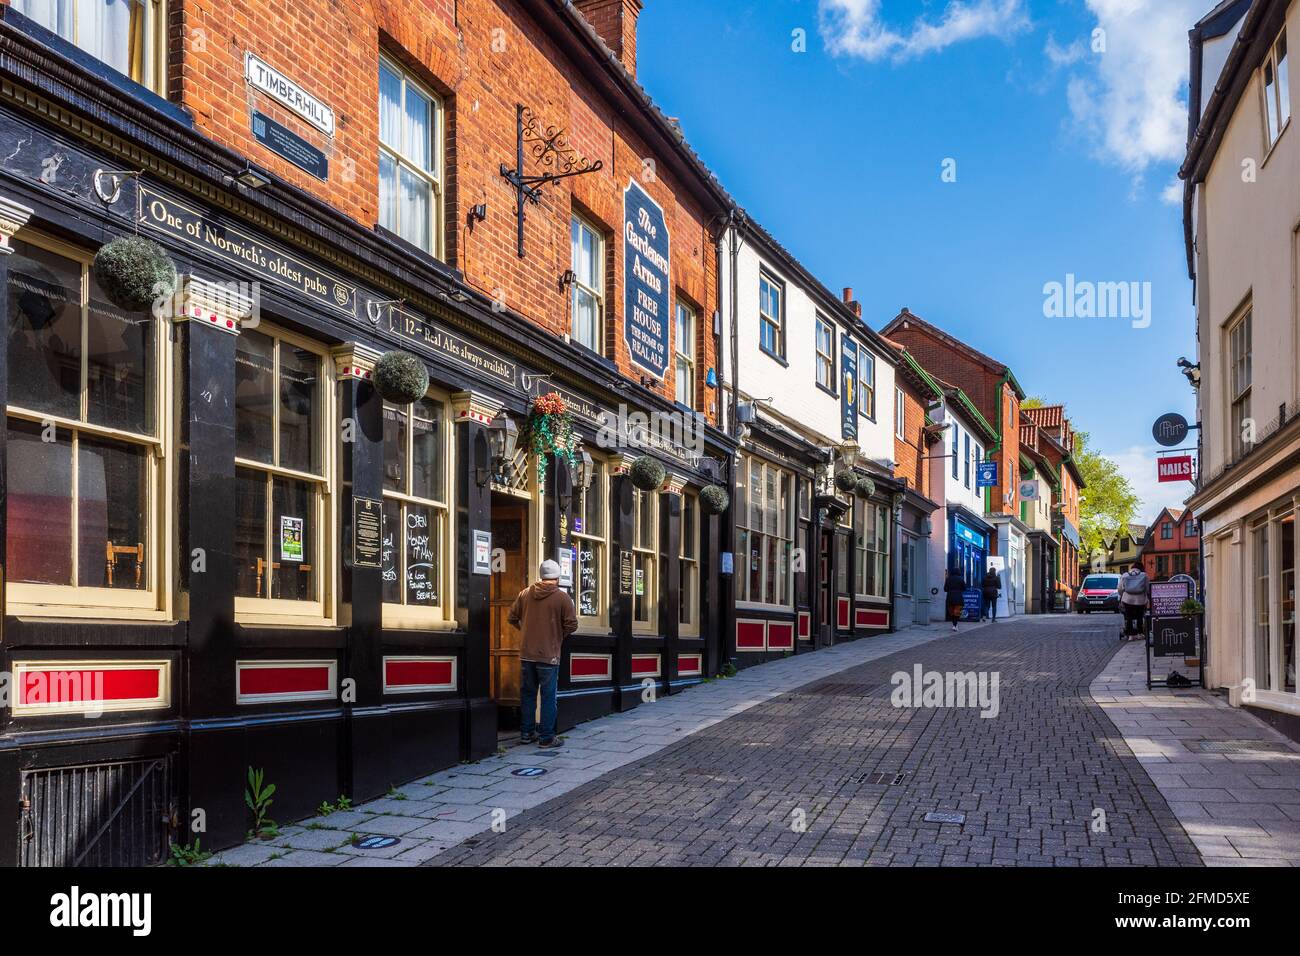 TimberHill Norwich or Timber Hill Norwich. One of the oldest recorded Norwich city streets. Damaged in the blitz 1942 but rebuilt. The Murderers Pub. Stock Photo